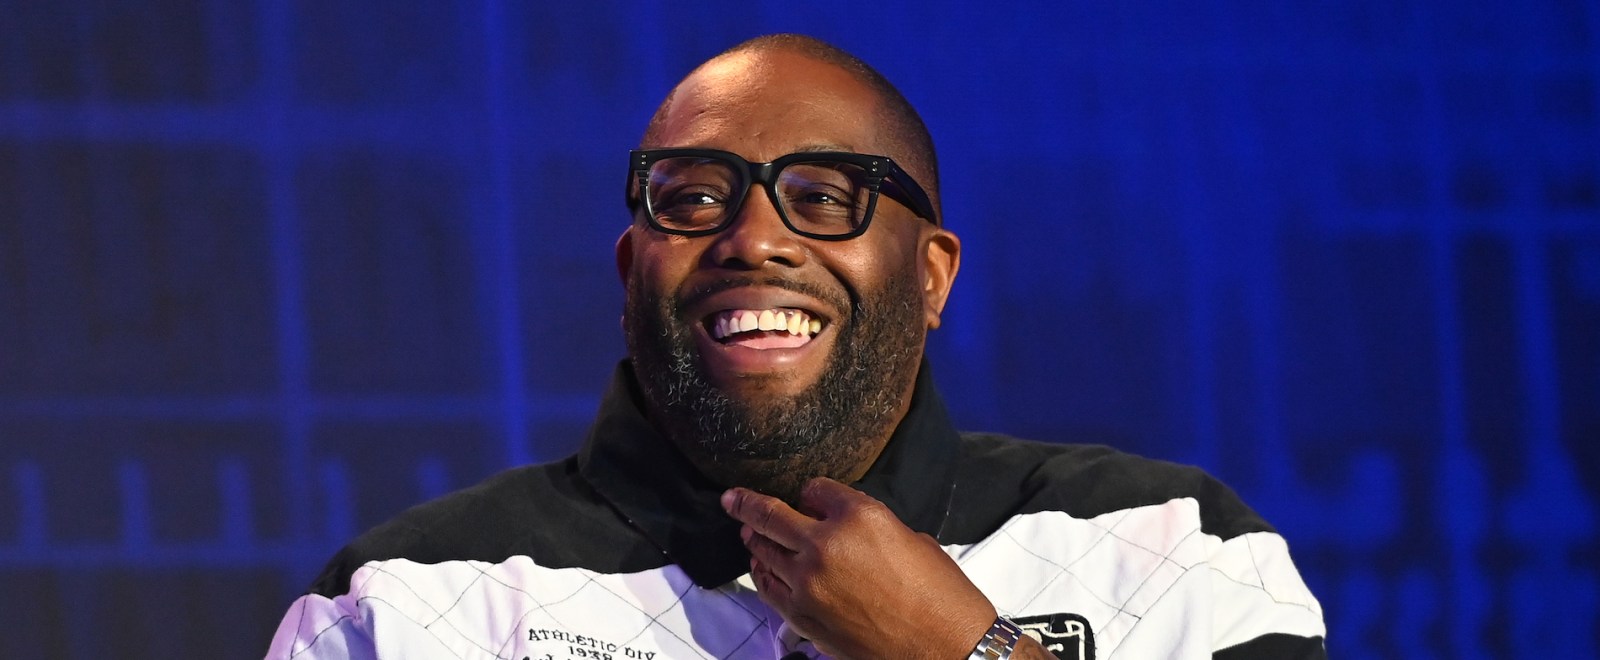 Killer Mike HOPE Global Forums Cryptocurrency and Digital Assets Summit 2022